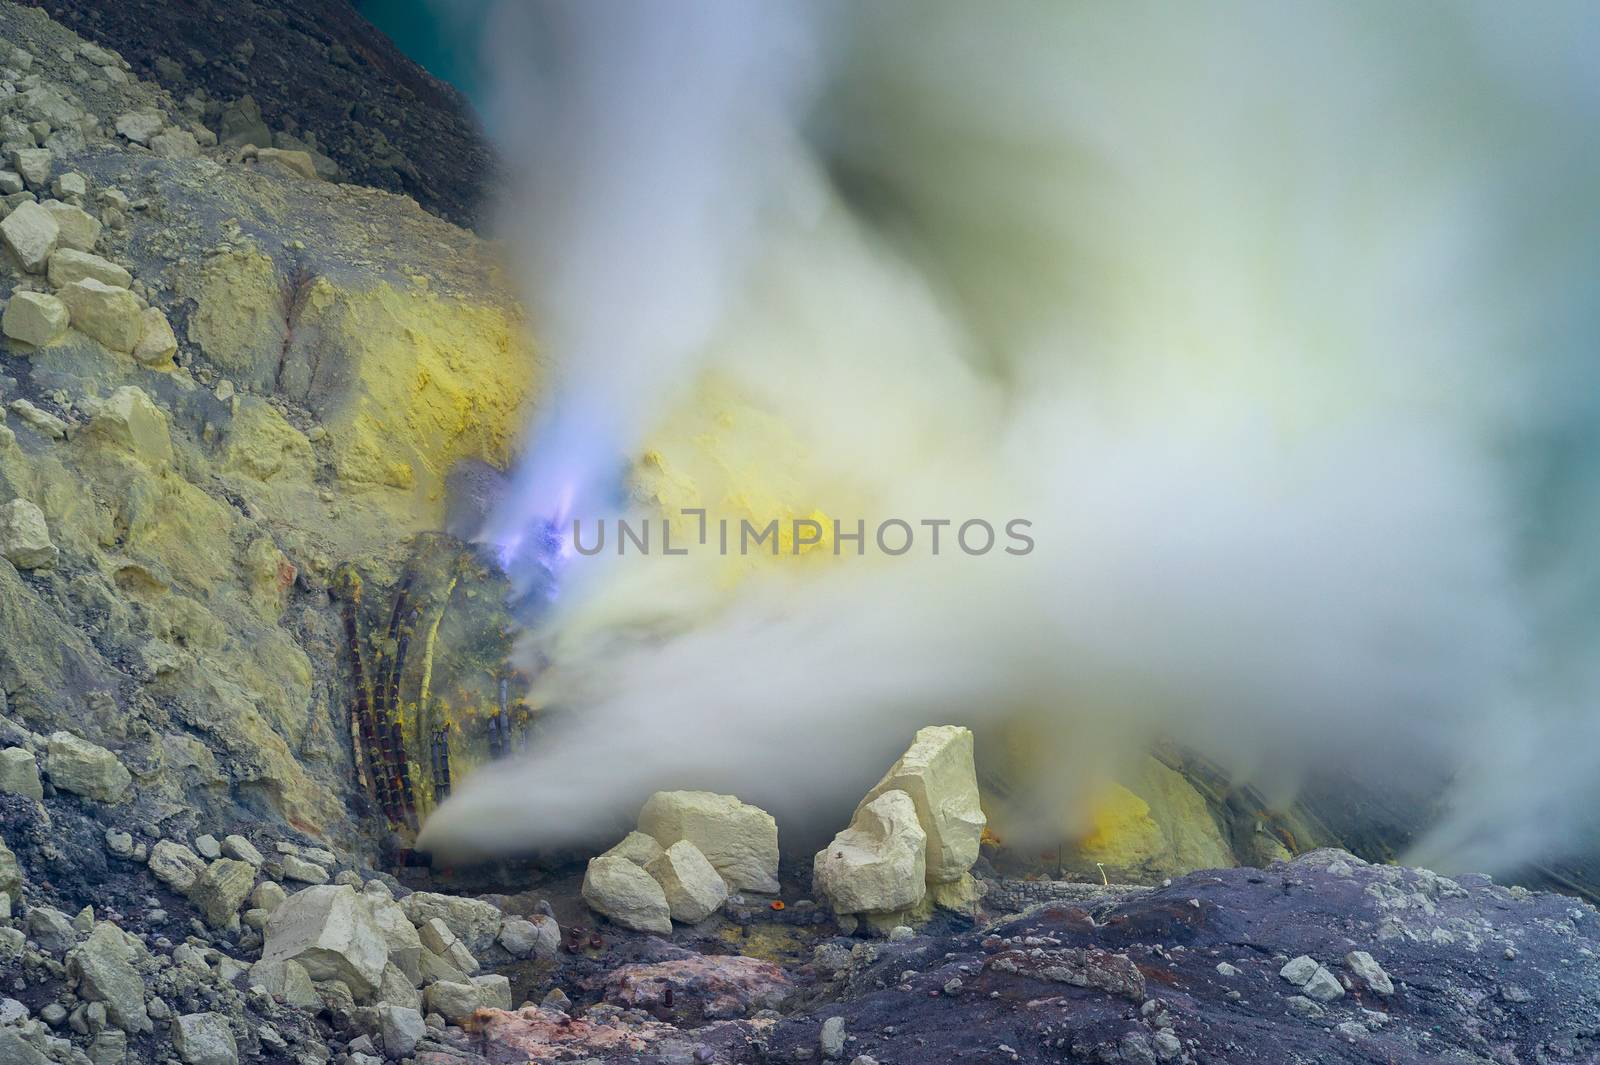 Blue sulfur flames and Sulfur fumes from the crater of Kawah Ijen Volcano in Indonesia. by gutarphotoghaphy